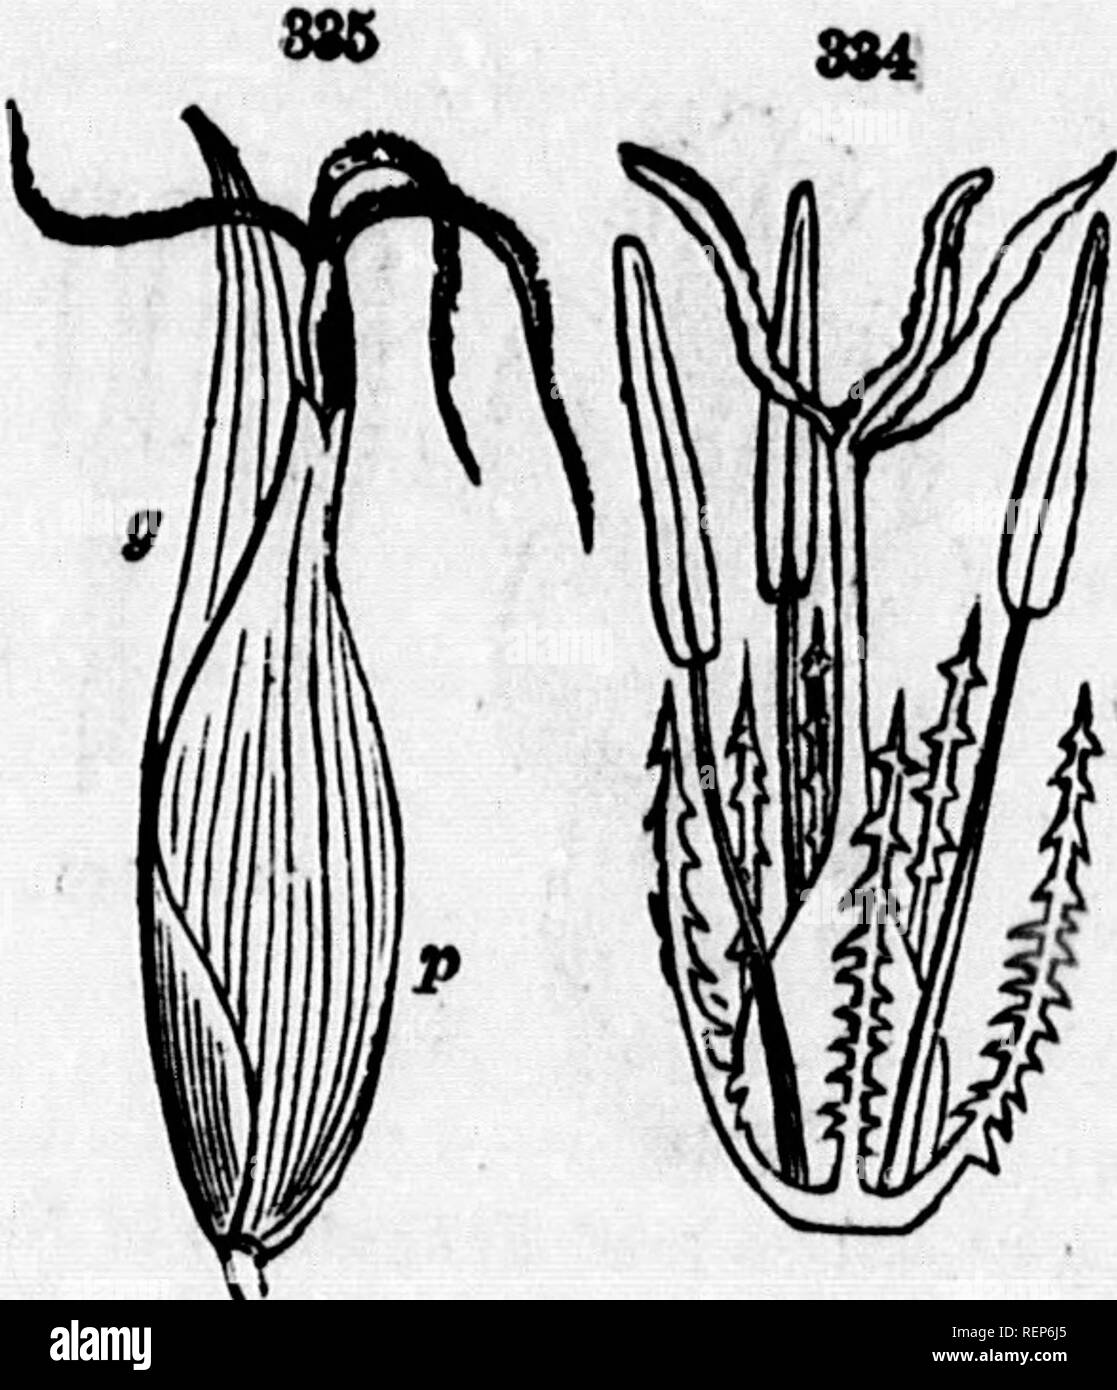 . Class-book of botany [microform] : being outlines of the structure, physiology, and classification of plants : with a flora of the United States and Canada. Botany; Botany; Plants; Plants; Botanique; Botanique; Plantes; Botanique. THK FLORAL ENVELOPS, OR PKHIANTH. 99. 488. Pemgynium is the name given to the urceolate perianth of Carex, in- venting the ovary but allowing the style to issue at its summit. It is evidently composed of two united oepals. 489. Glumes and pales represent the floral envelops, or rather the invo- lucre of the Grasses. Tiieir alternating arrangement clearly distinguis Stock Photo